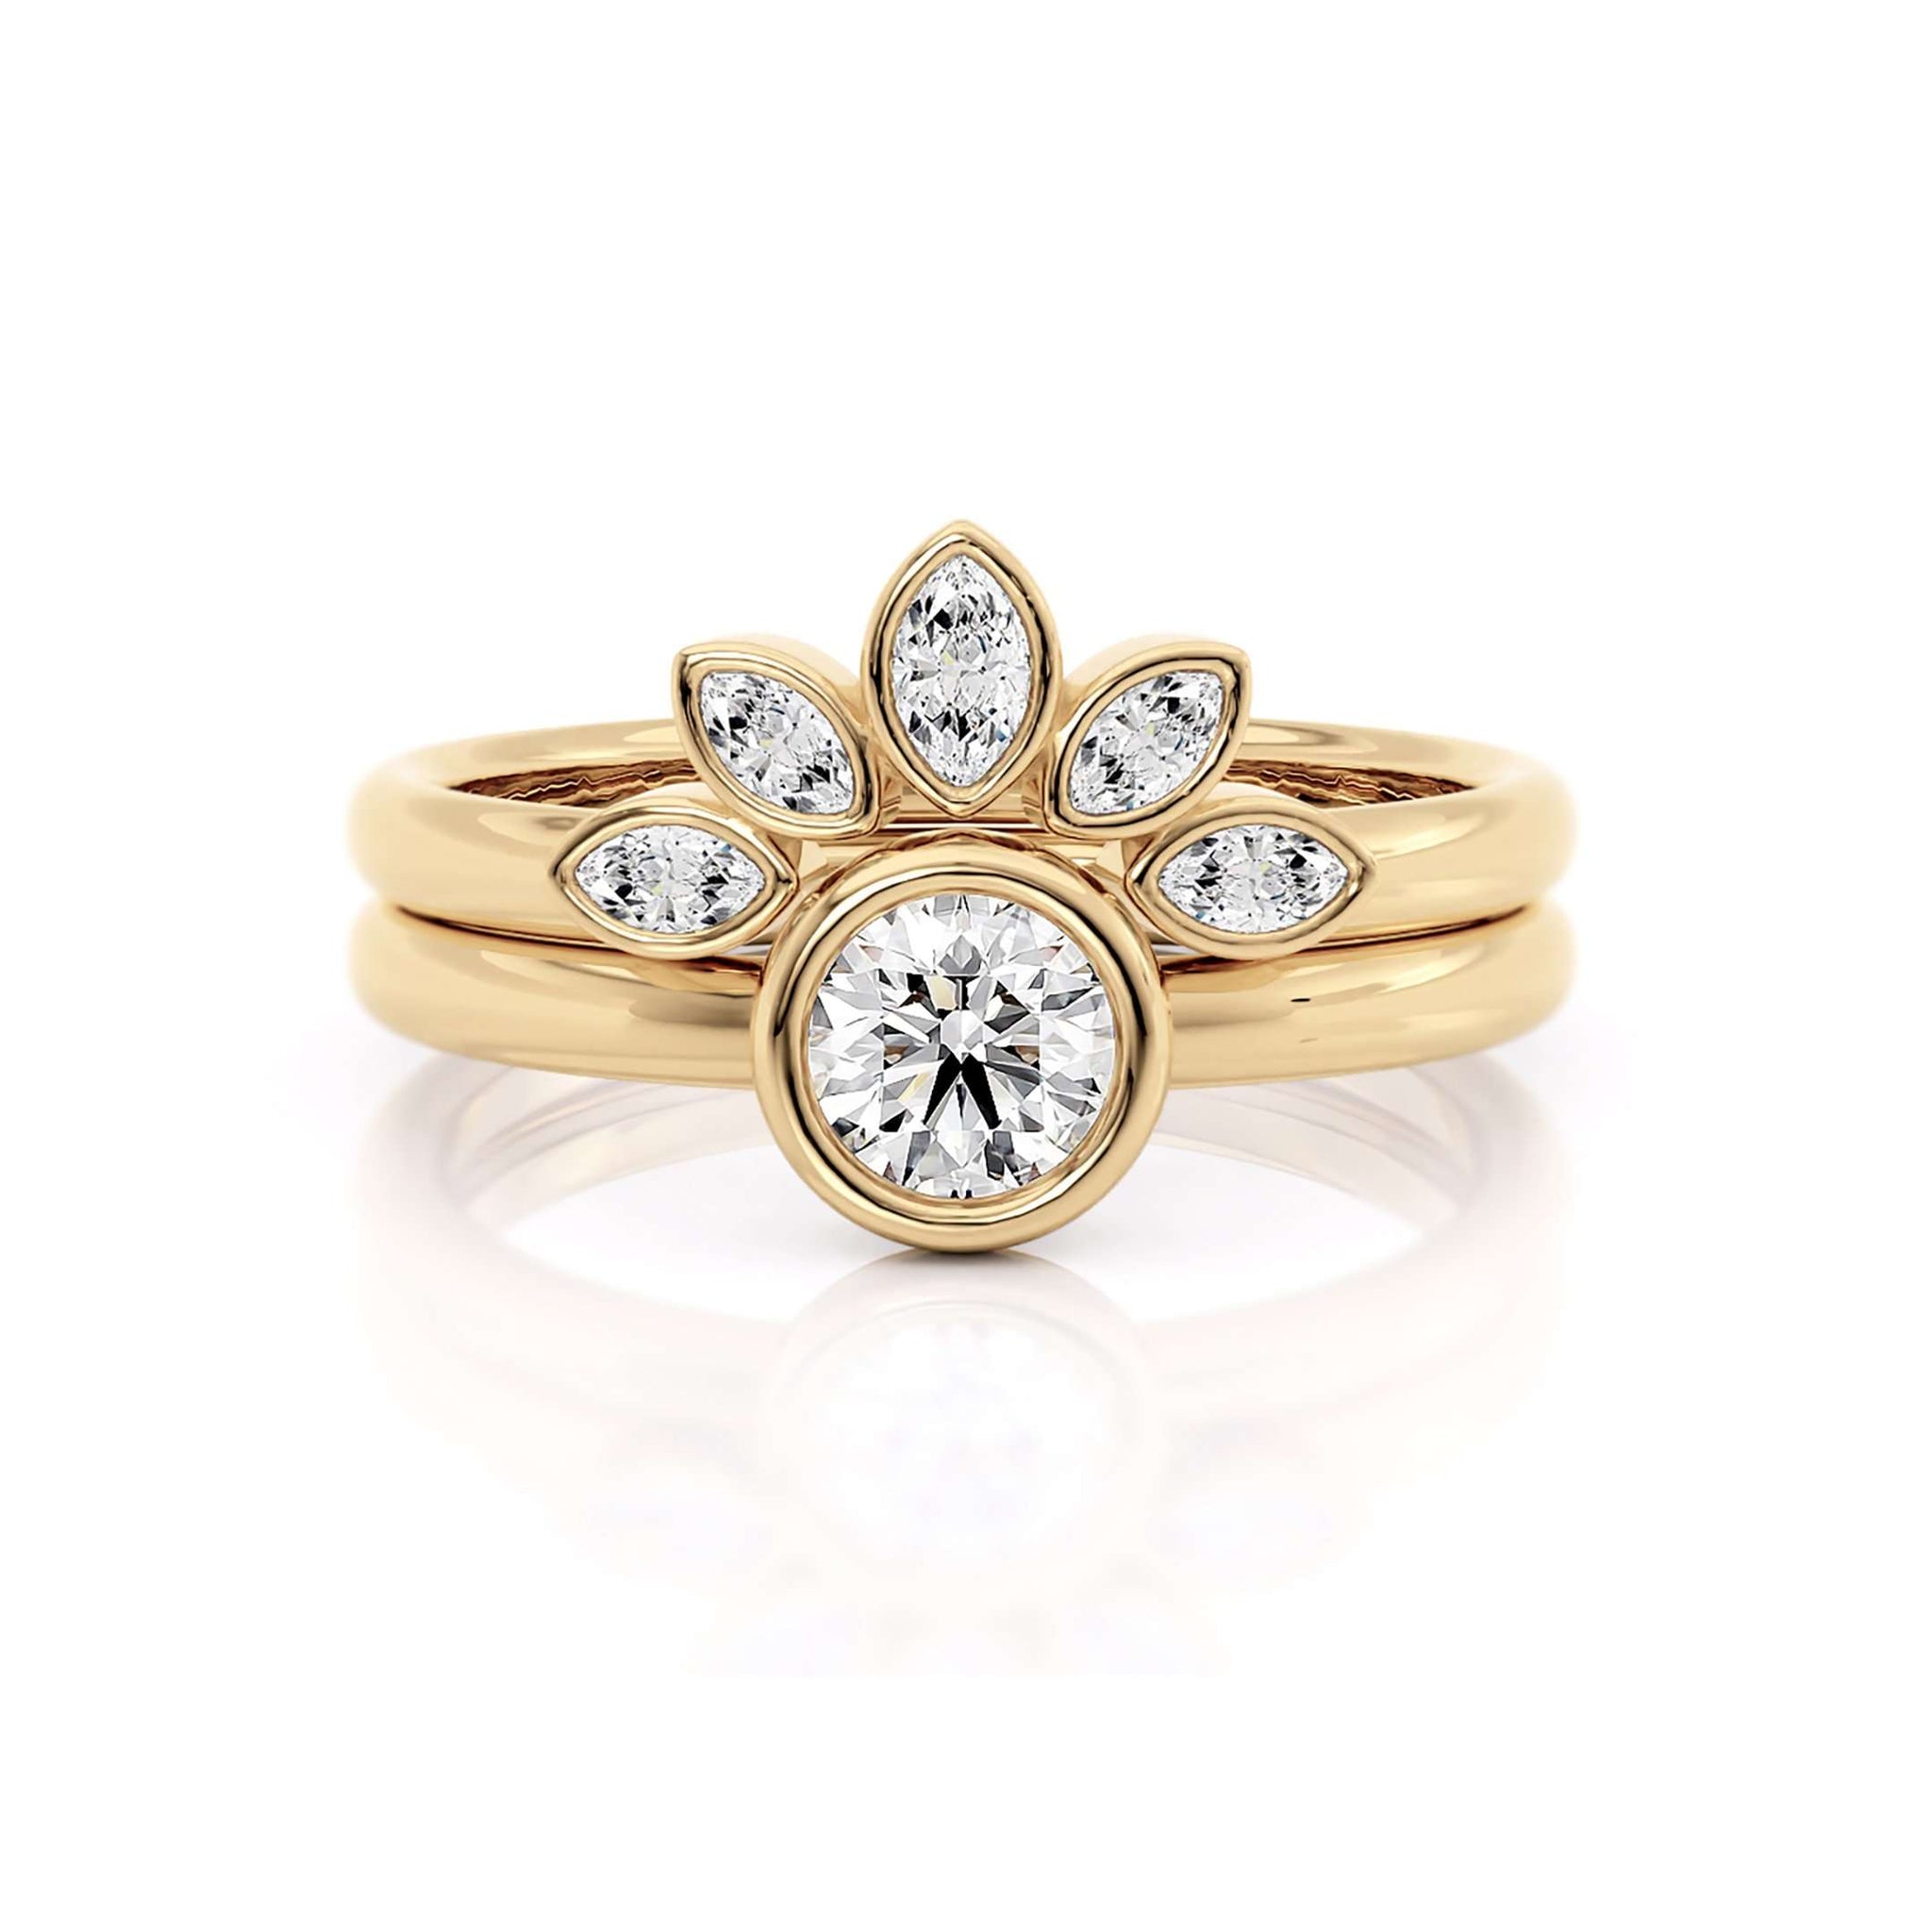 2 2 Marquise Ring Enhancer with Round diamond Moissanite Bezel Ring 14k Yellow Gold 4668e2fd a30d 434a 9ebf